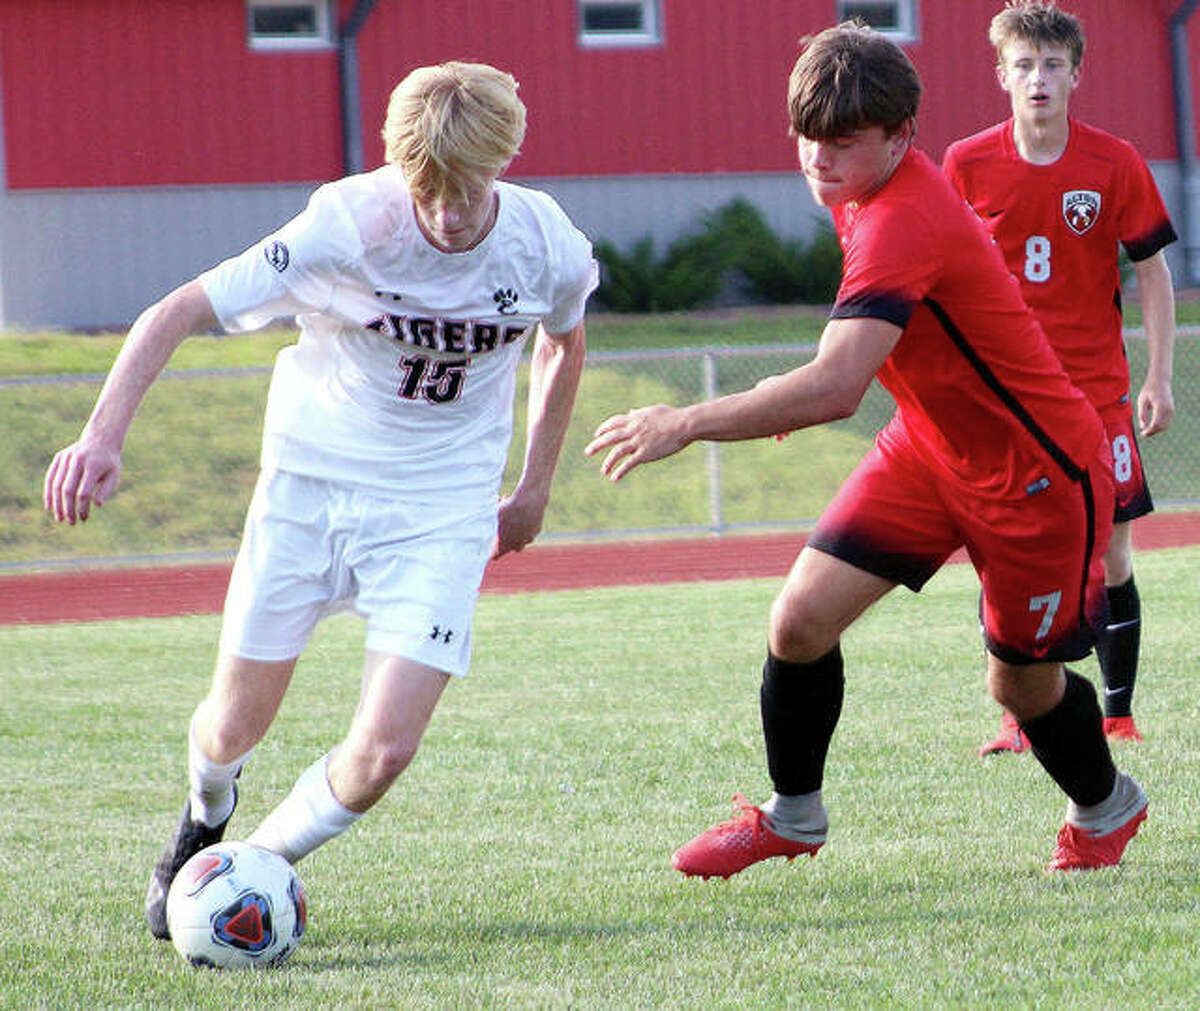 Hayden Batchelor of Alton, right, eyes Edwardsville’s Adam Sneed during action earlier this season. Alton, EHS, Quincy and Granite City will play in the Edwardsville Class 3A Regional this week.